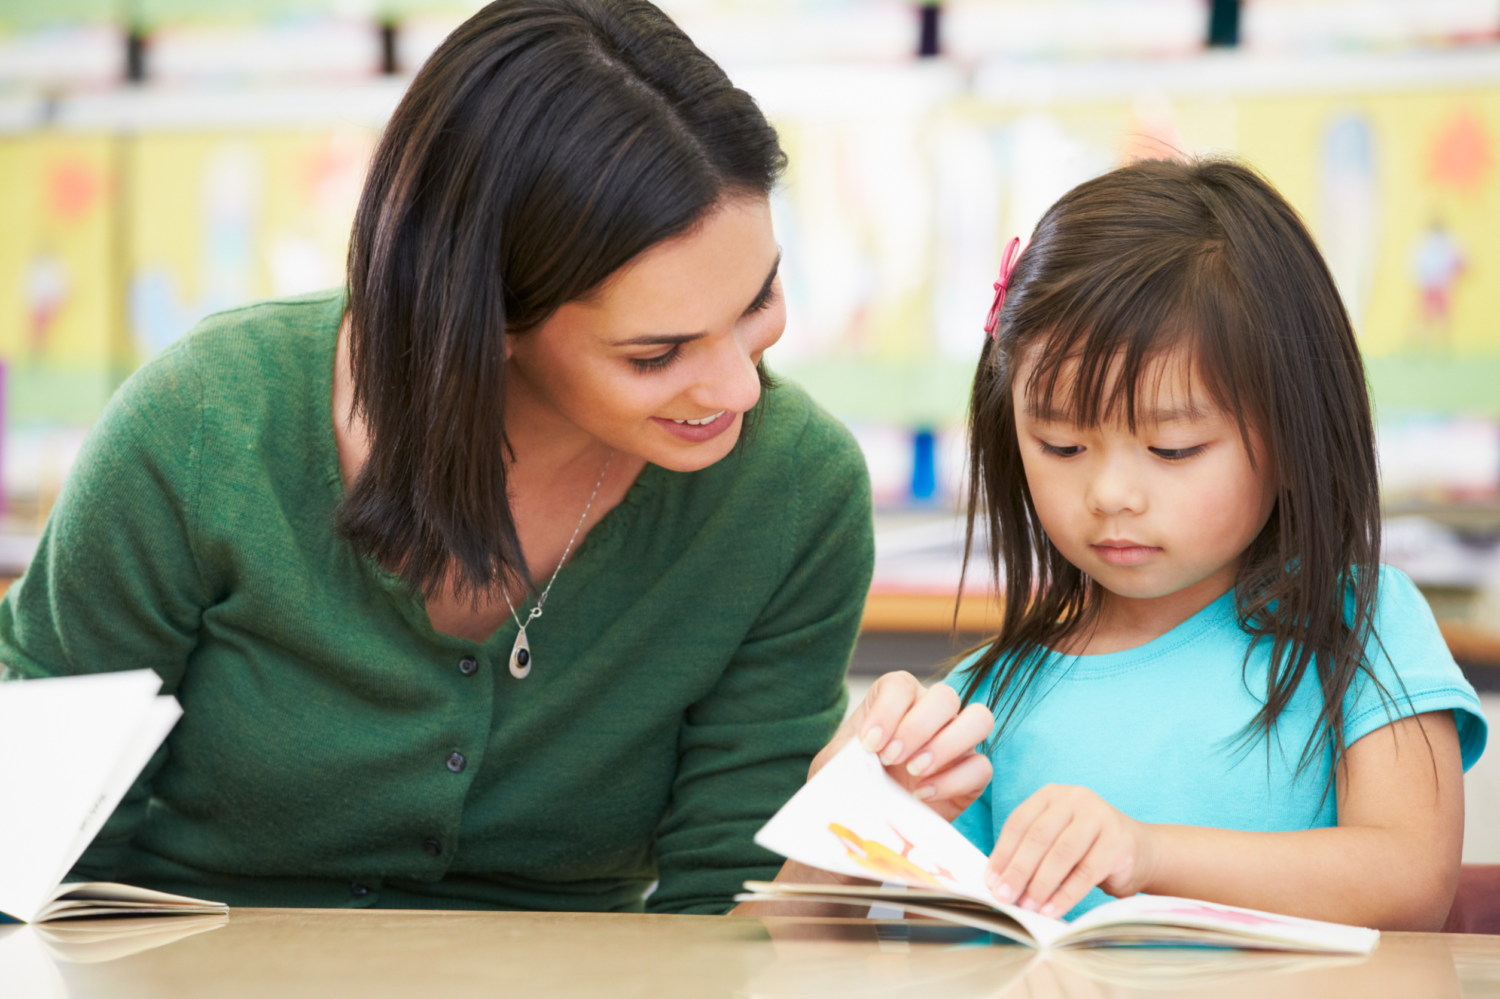 Image description: A volunteer reads with a young child in a classroom.